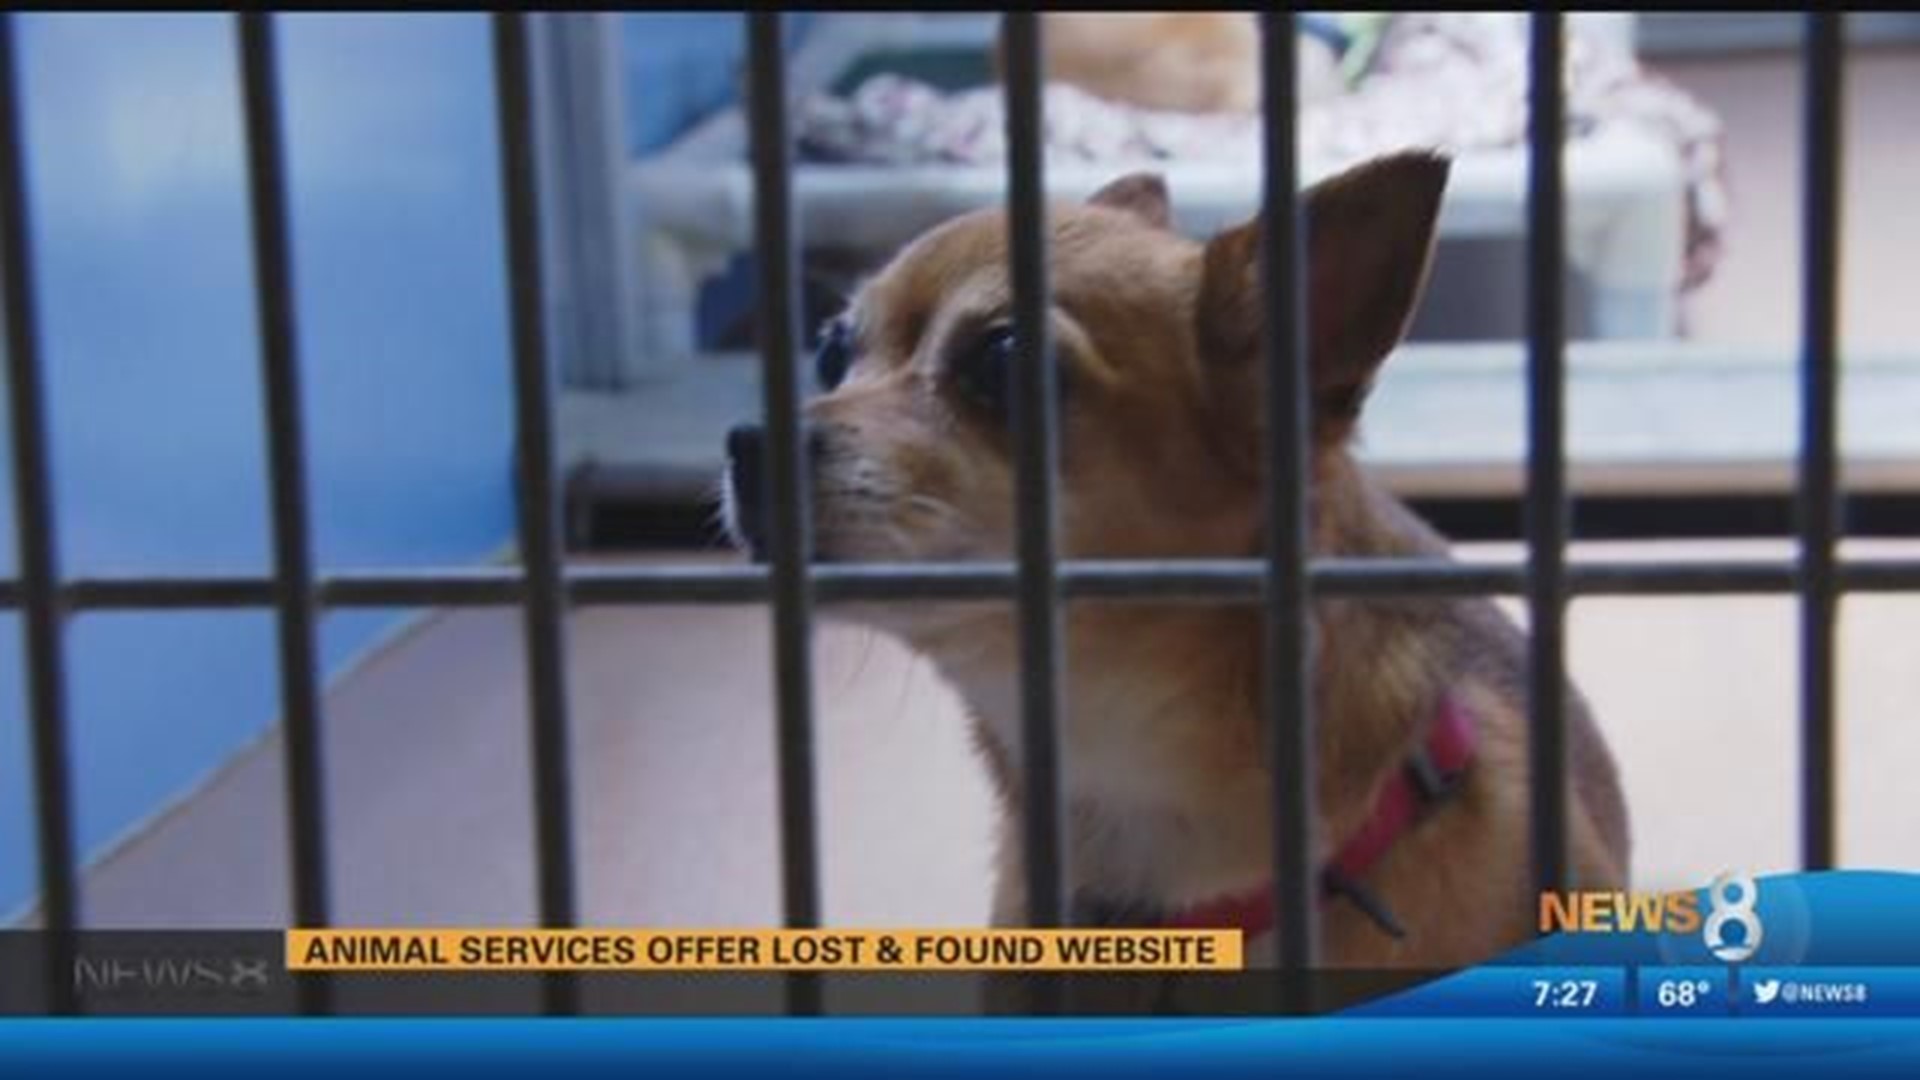 Animal services offer lost and found website 